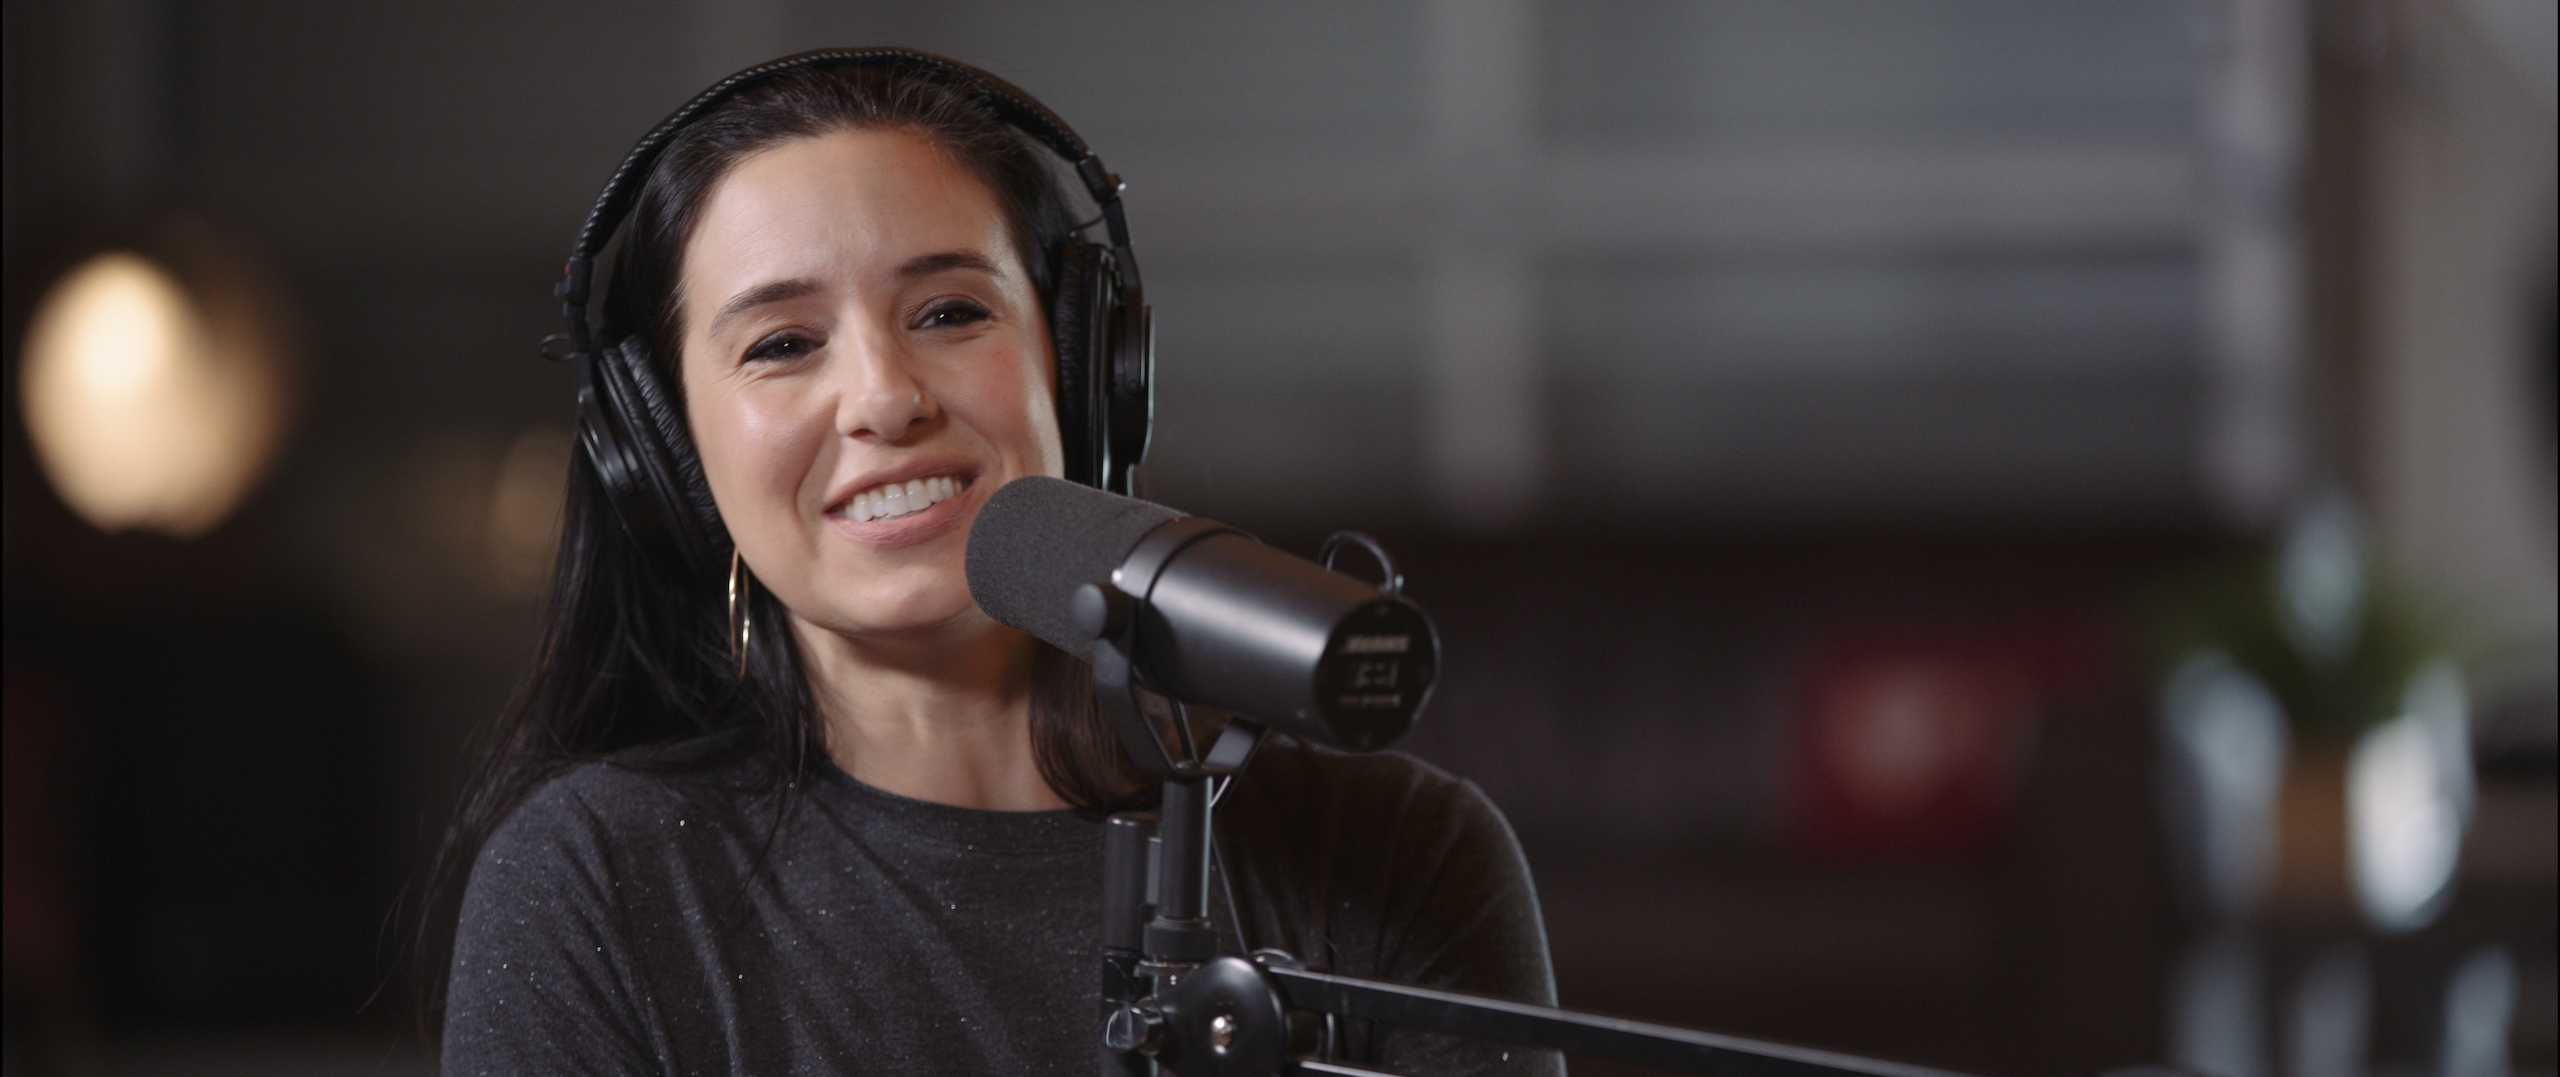 Uncreative Radio with Leslie Lynn Nifoussi wearing headphones and smiling by a microphone